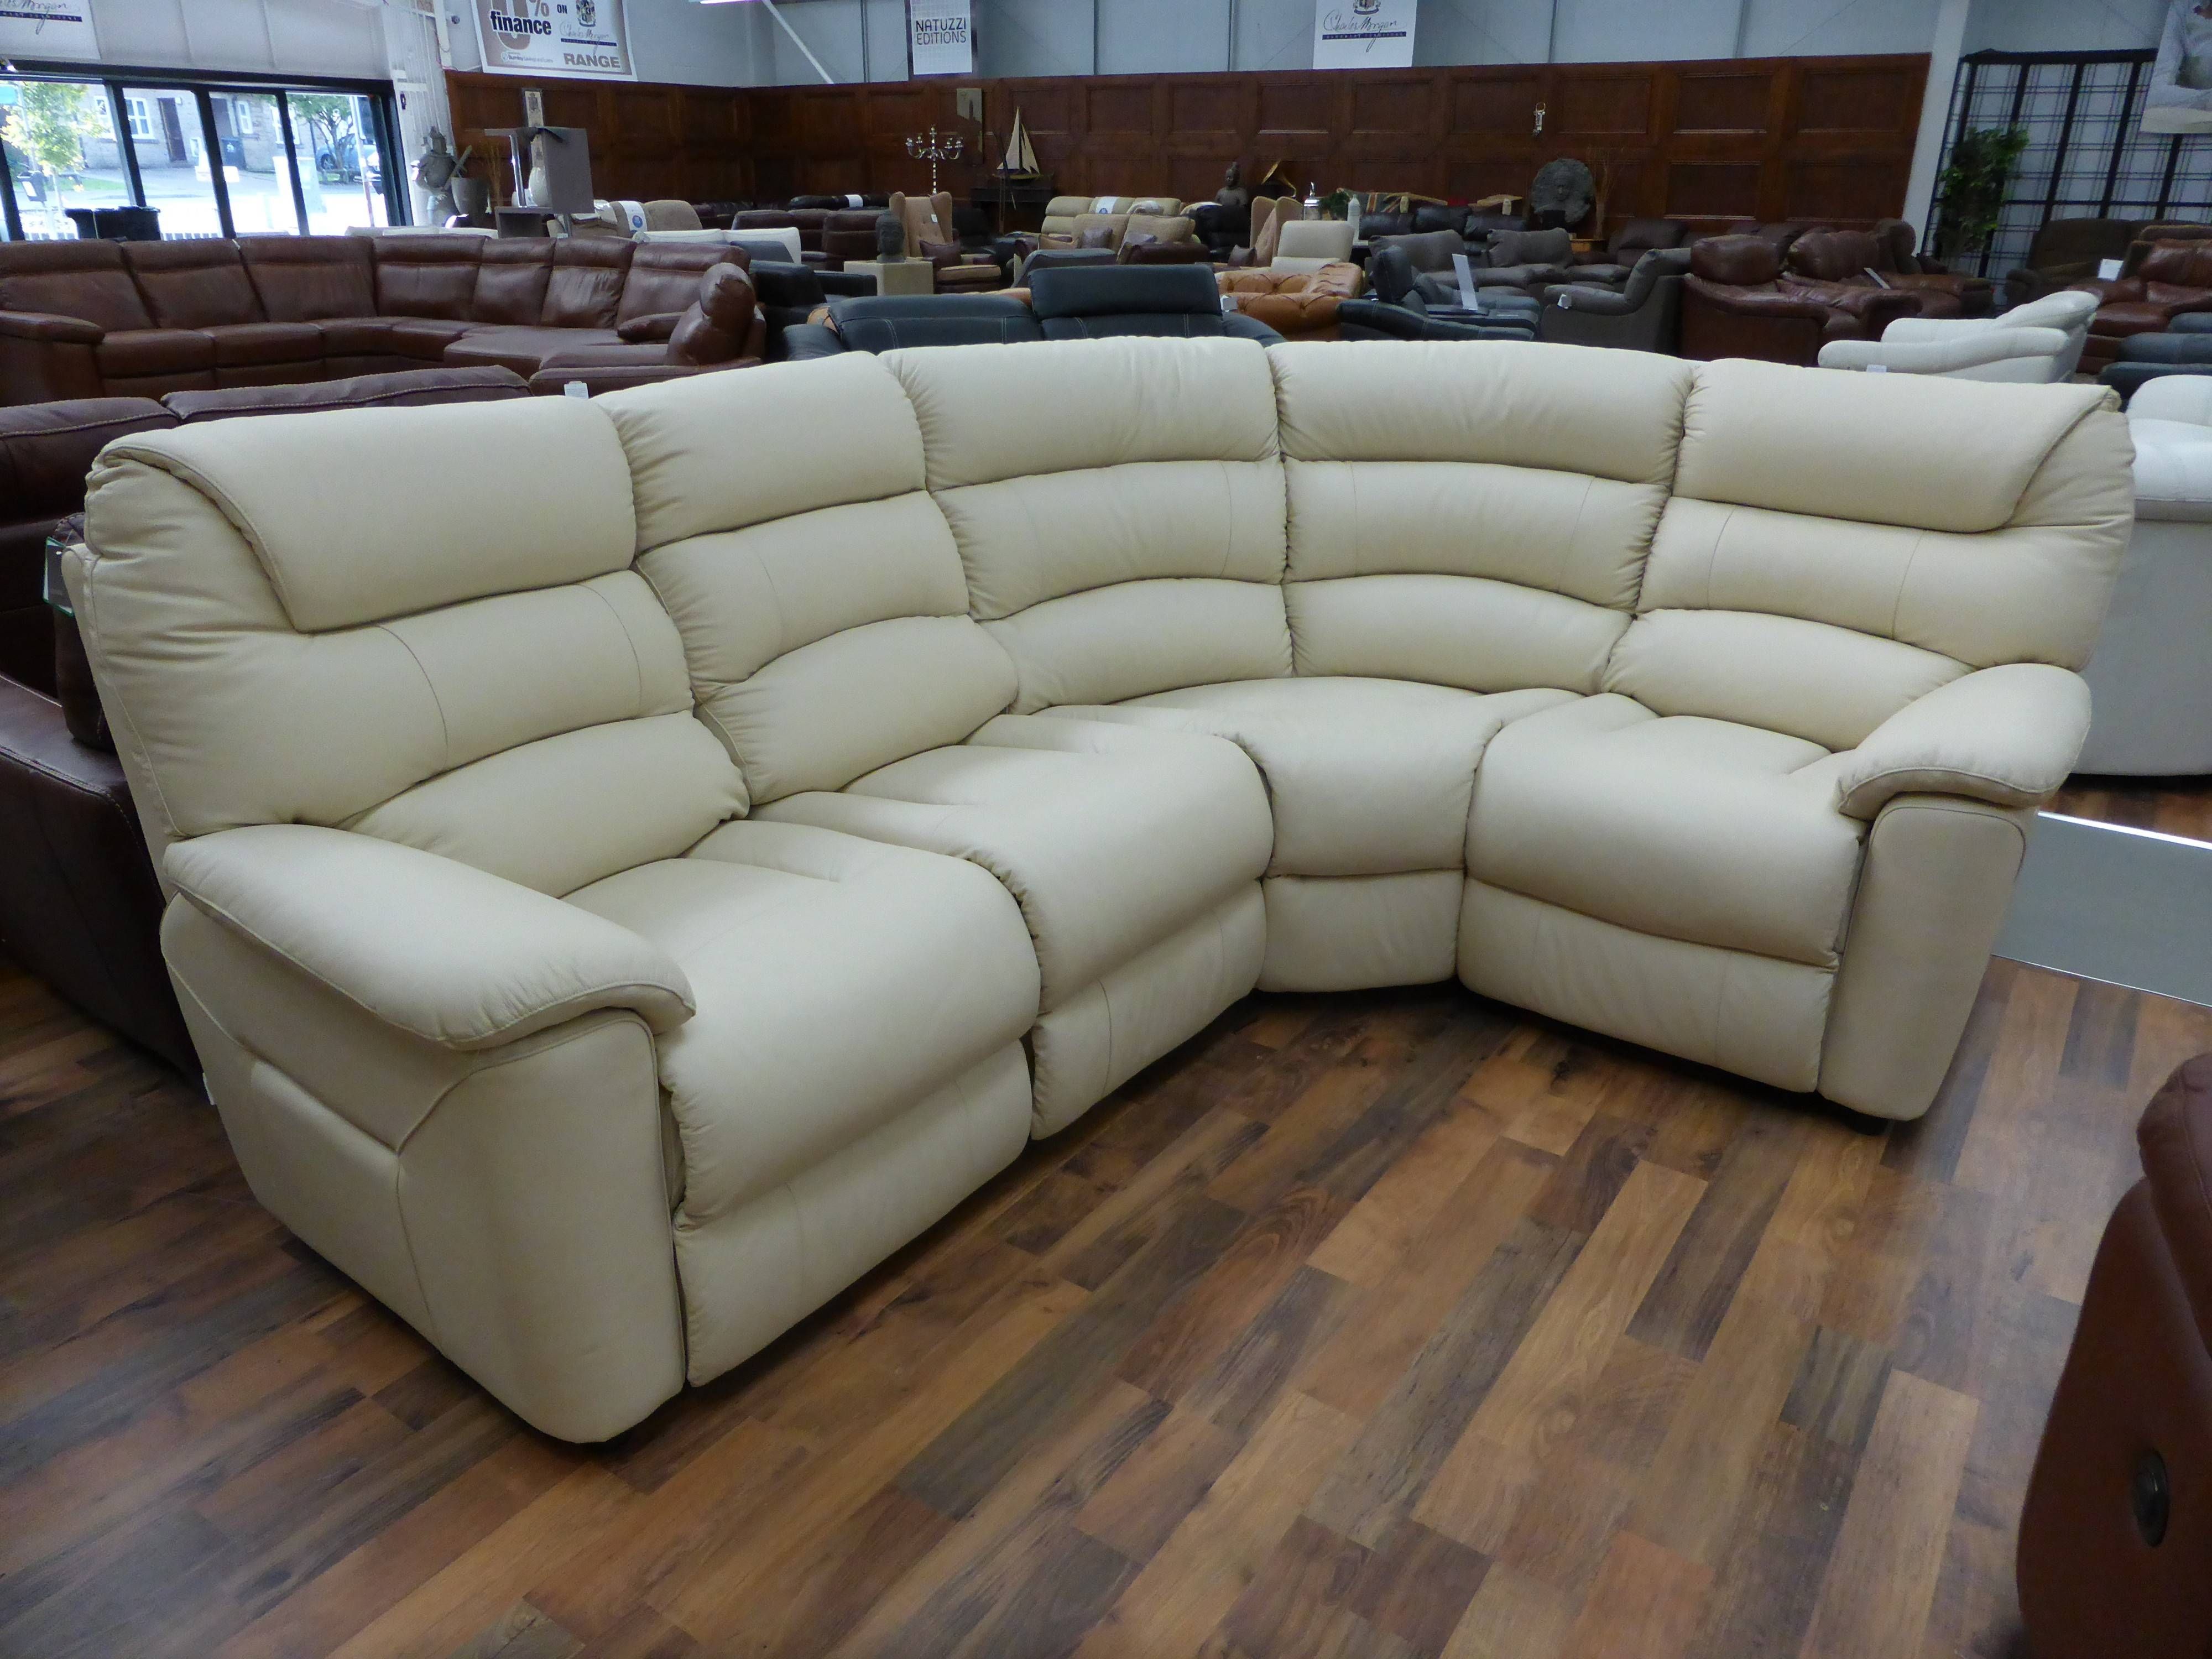 Furniture Cozy Lazy Boy Sectional For Home Furniture Idea Within Lazyboy Sectional Sofas 